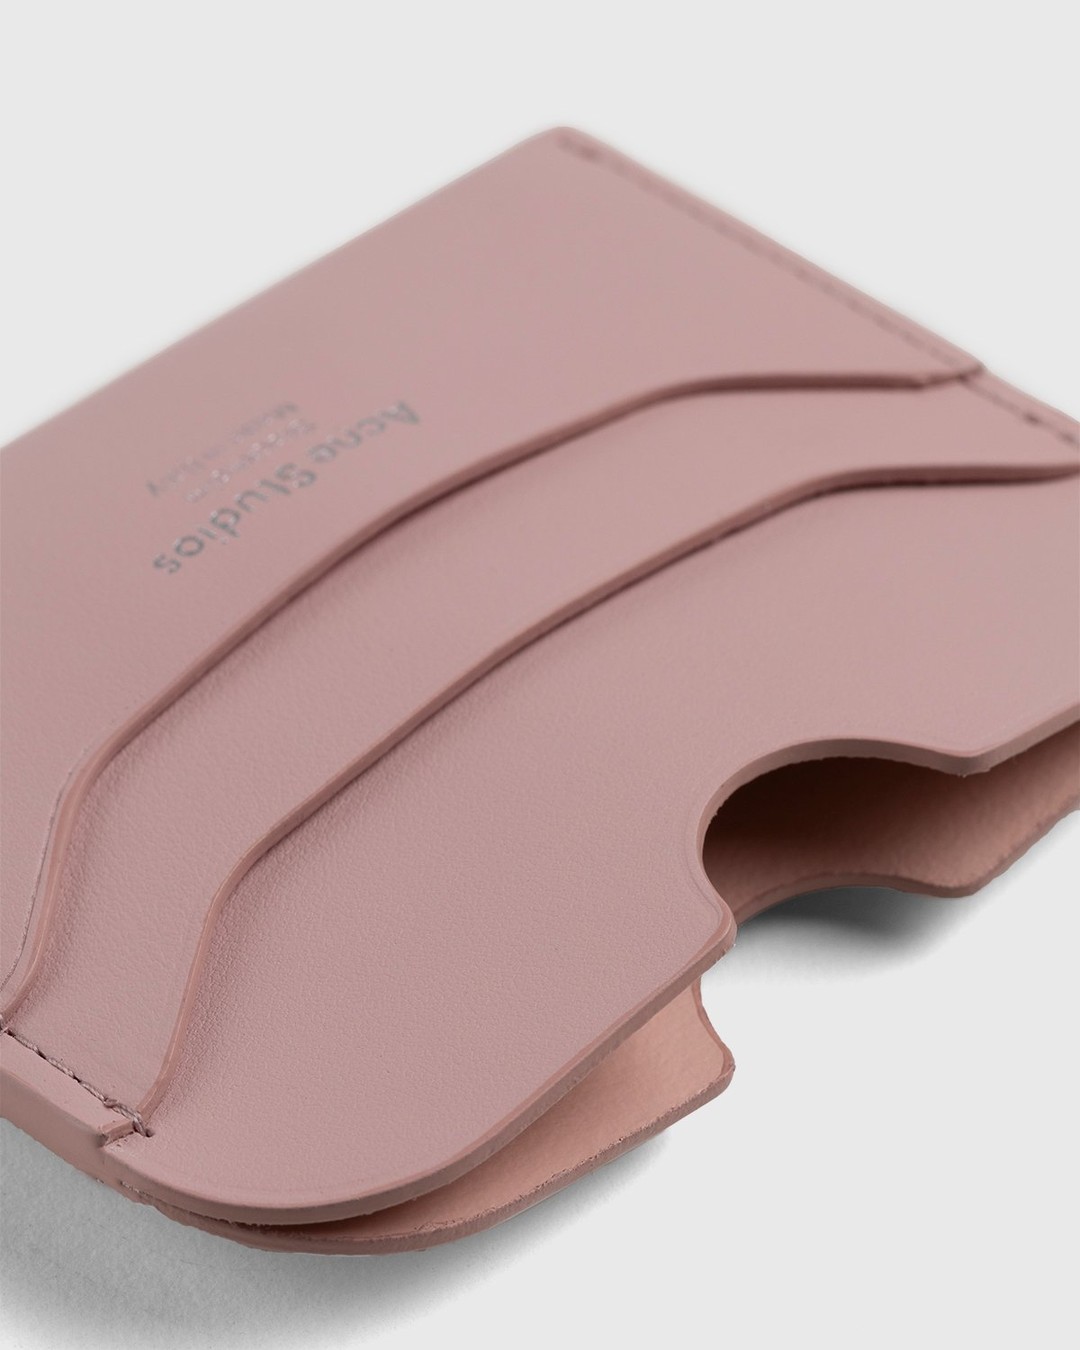 Acne Studios – Leather Card Case Powder Pink - Card Holders - Pink - Image 4